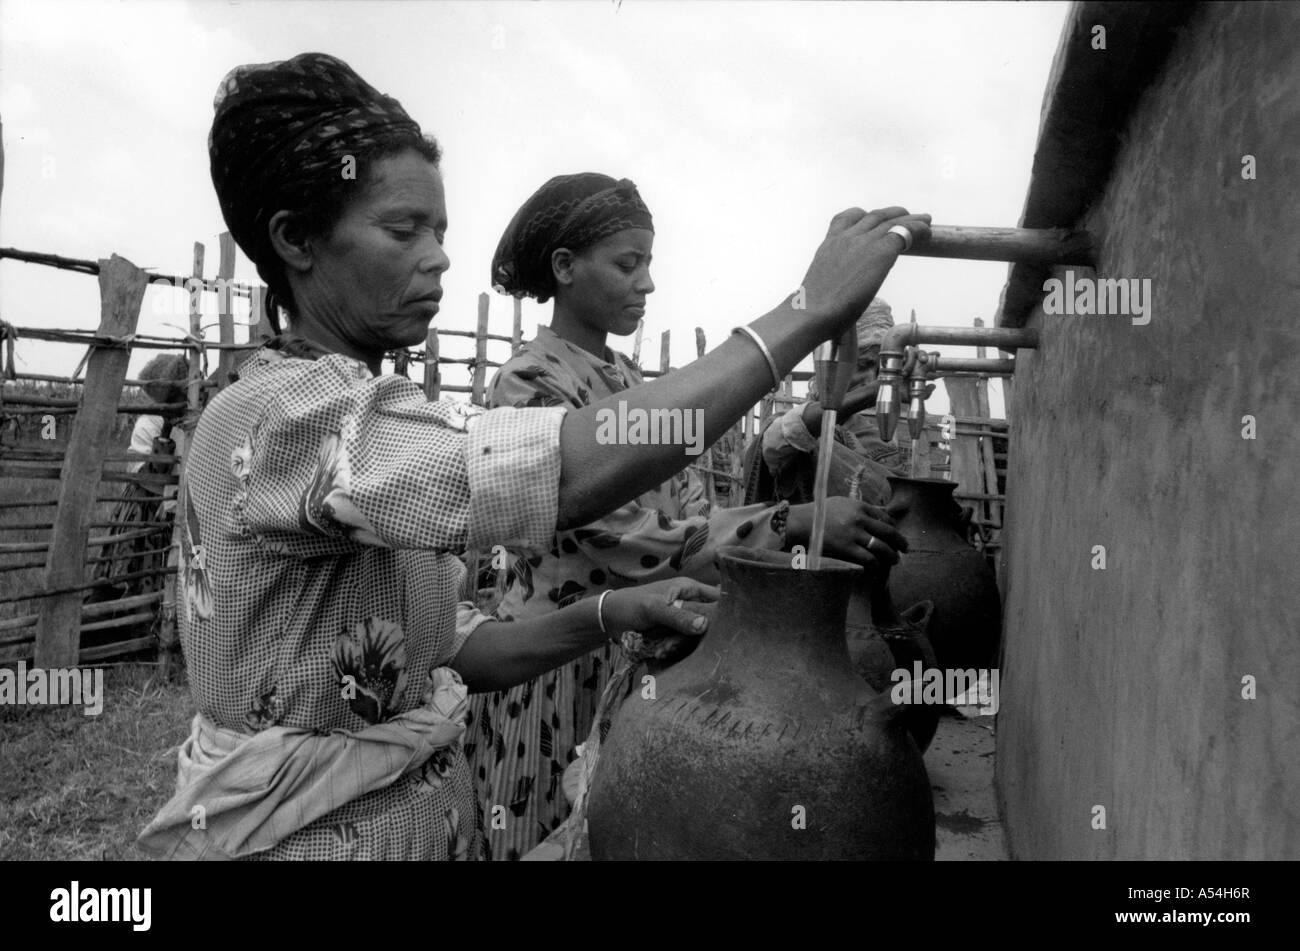 Painet hq1500 black and white water women taking public faucet village western shoa ethiopia images bw country developing Stock Photo